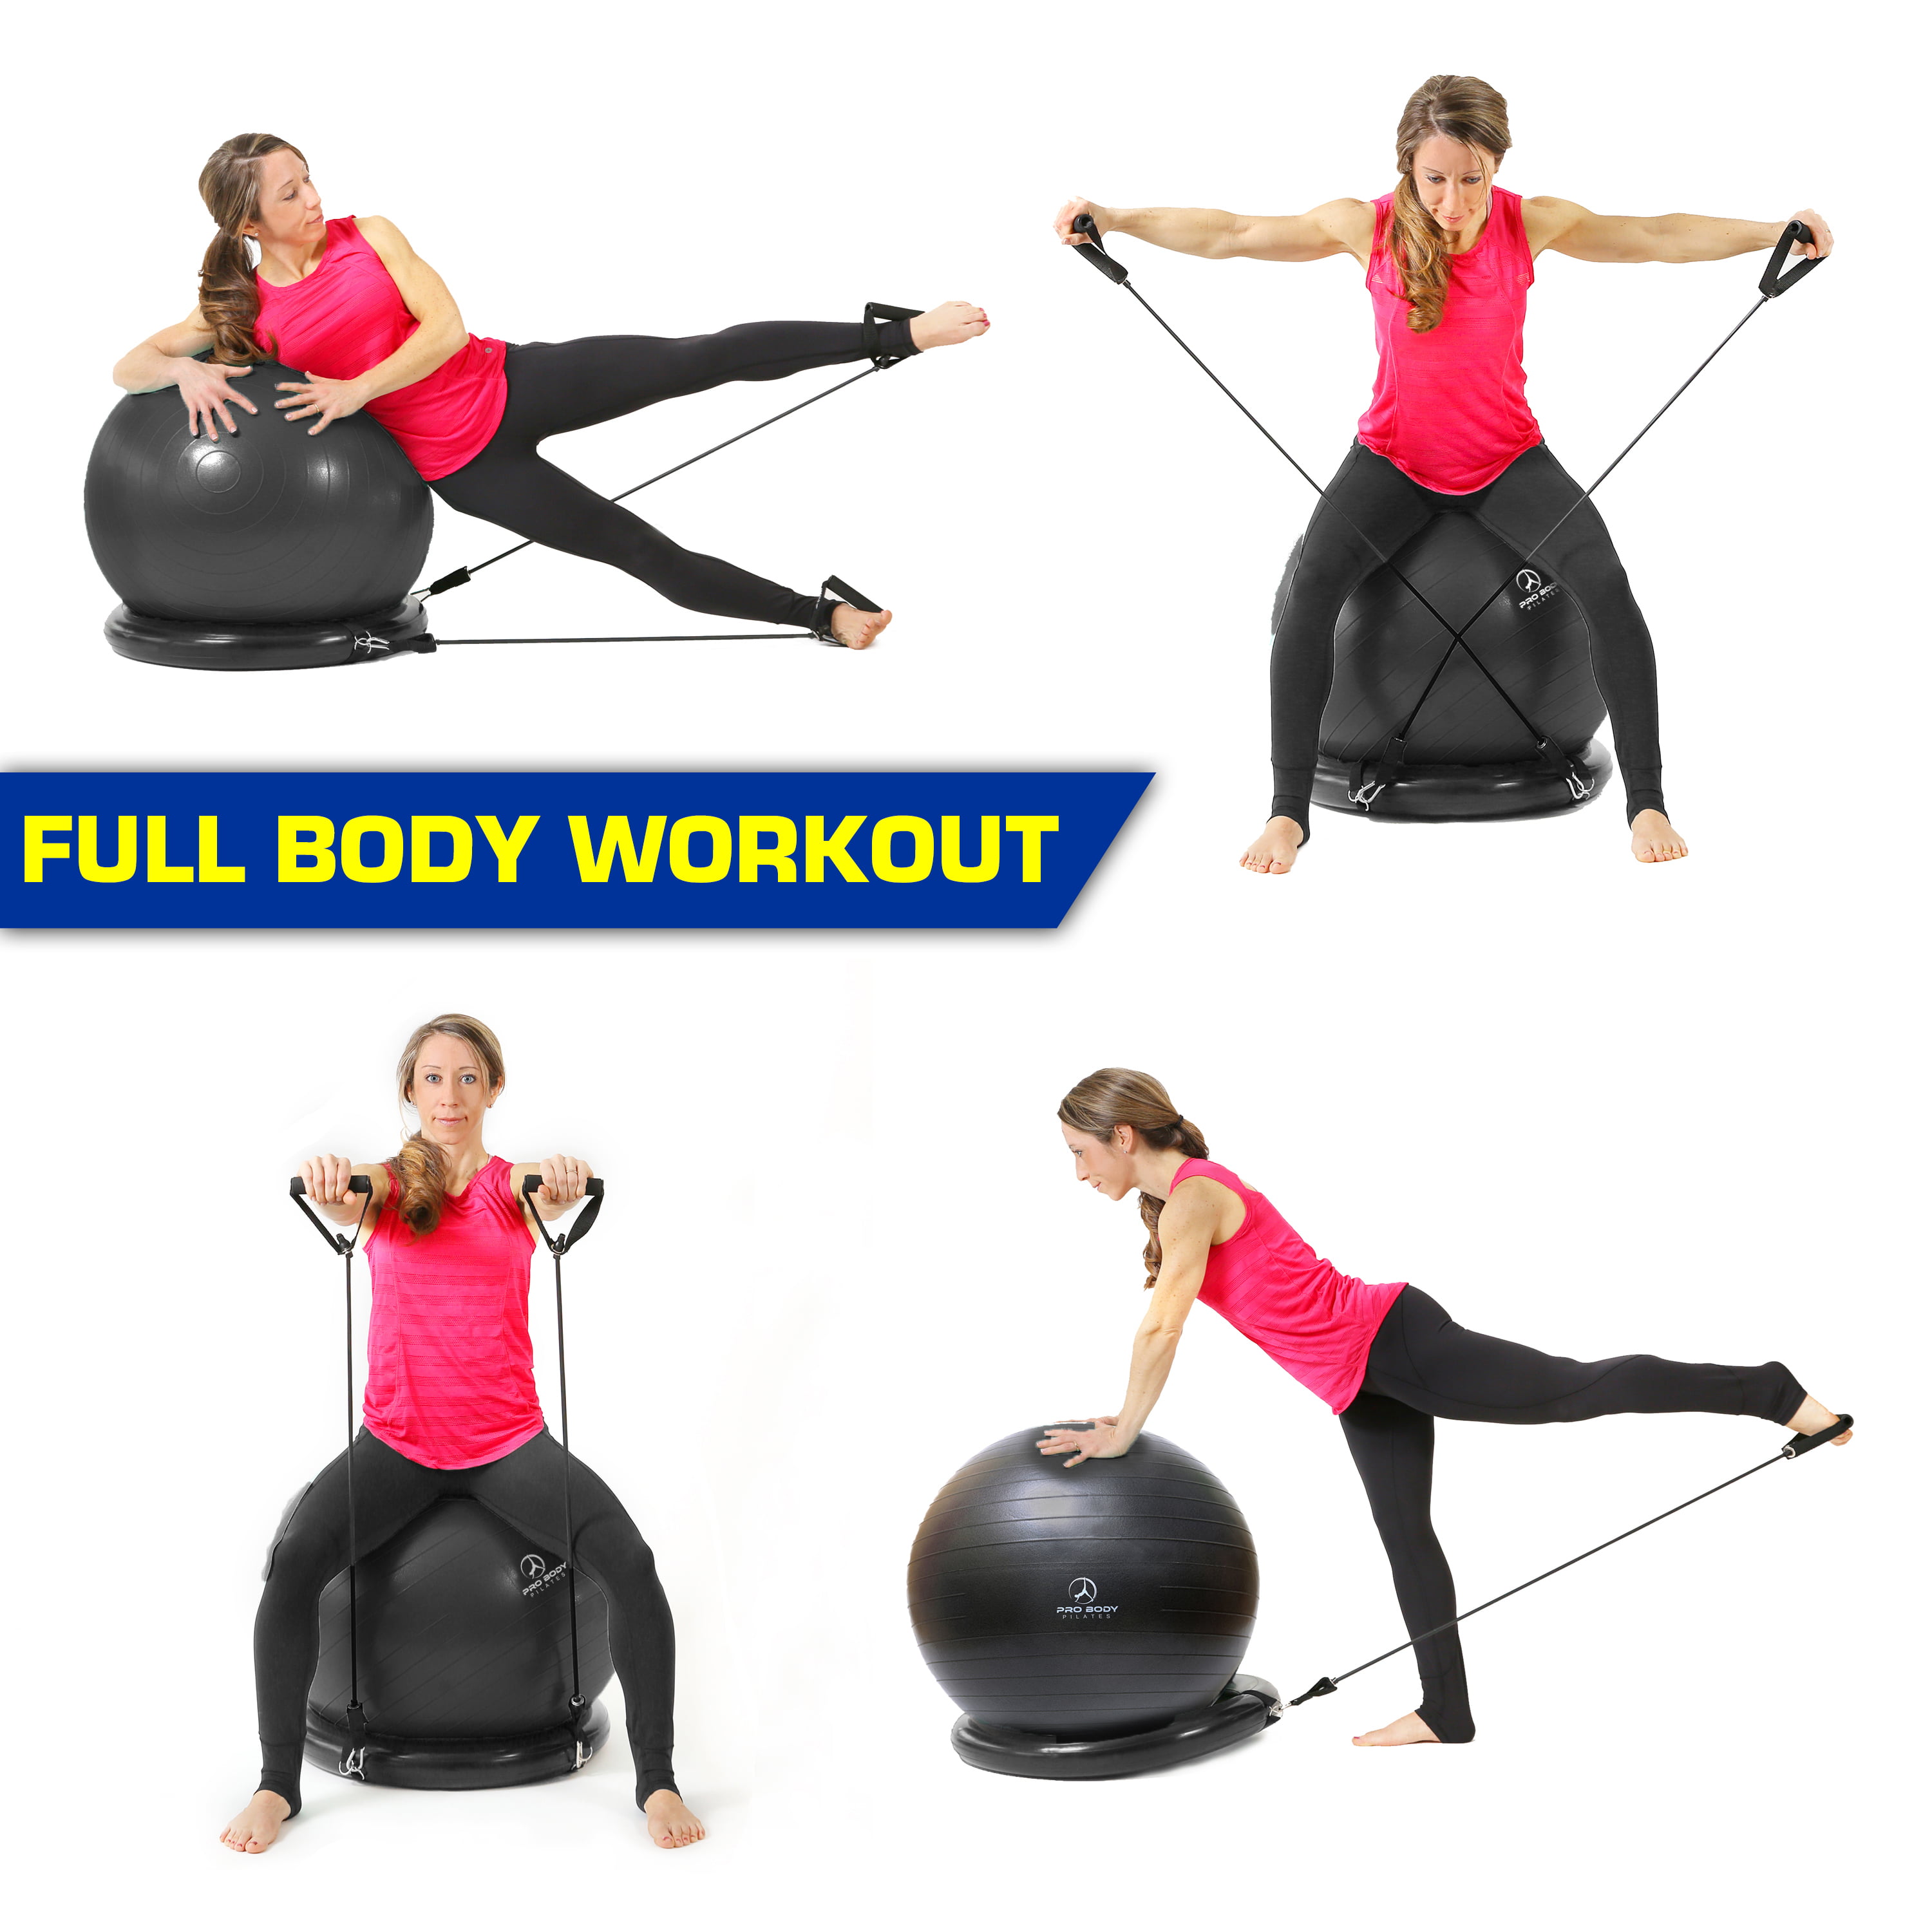 Equipment for Women and Men Improve Balance and Posture Premium Quality Ball Chair for Fitness NEUMEE Yoga Exercise Ball & Stability Base with Resistance Bands for Home Gym & Office